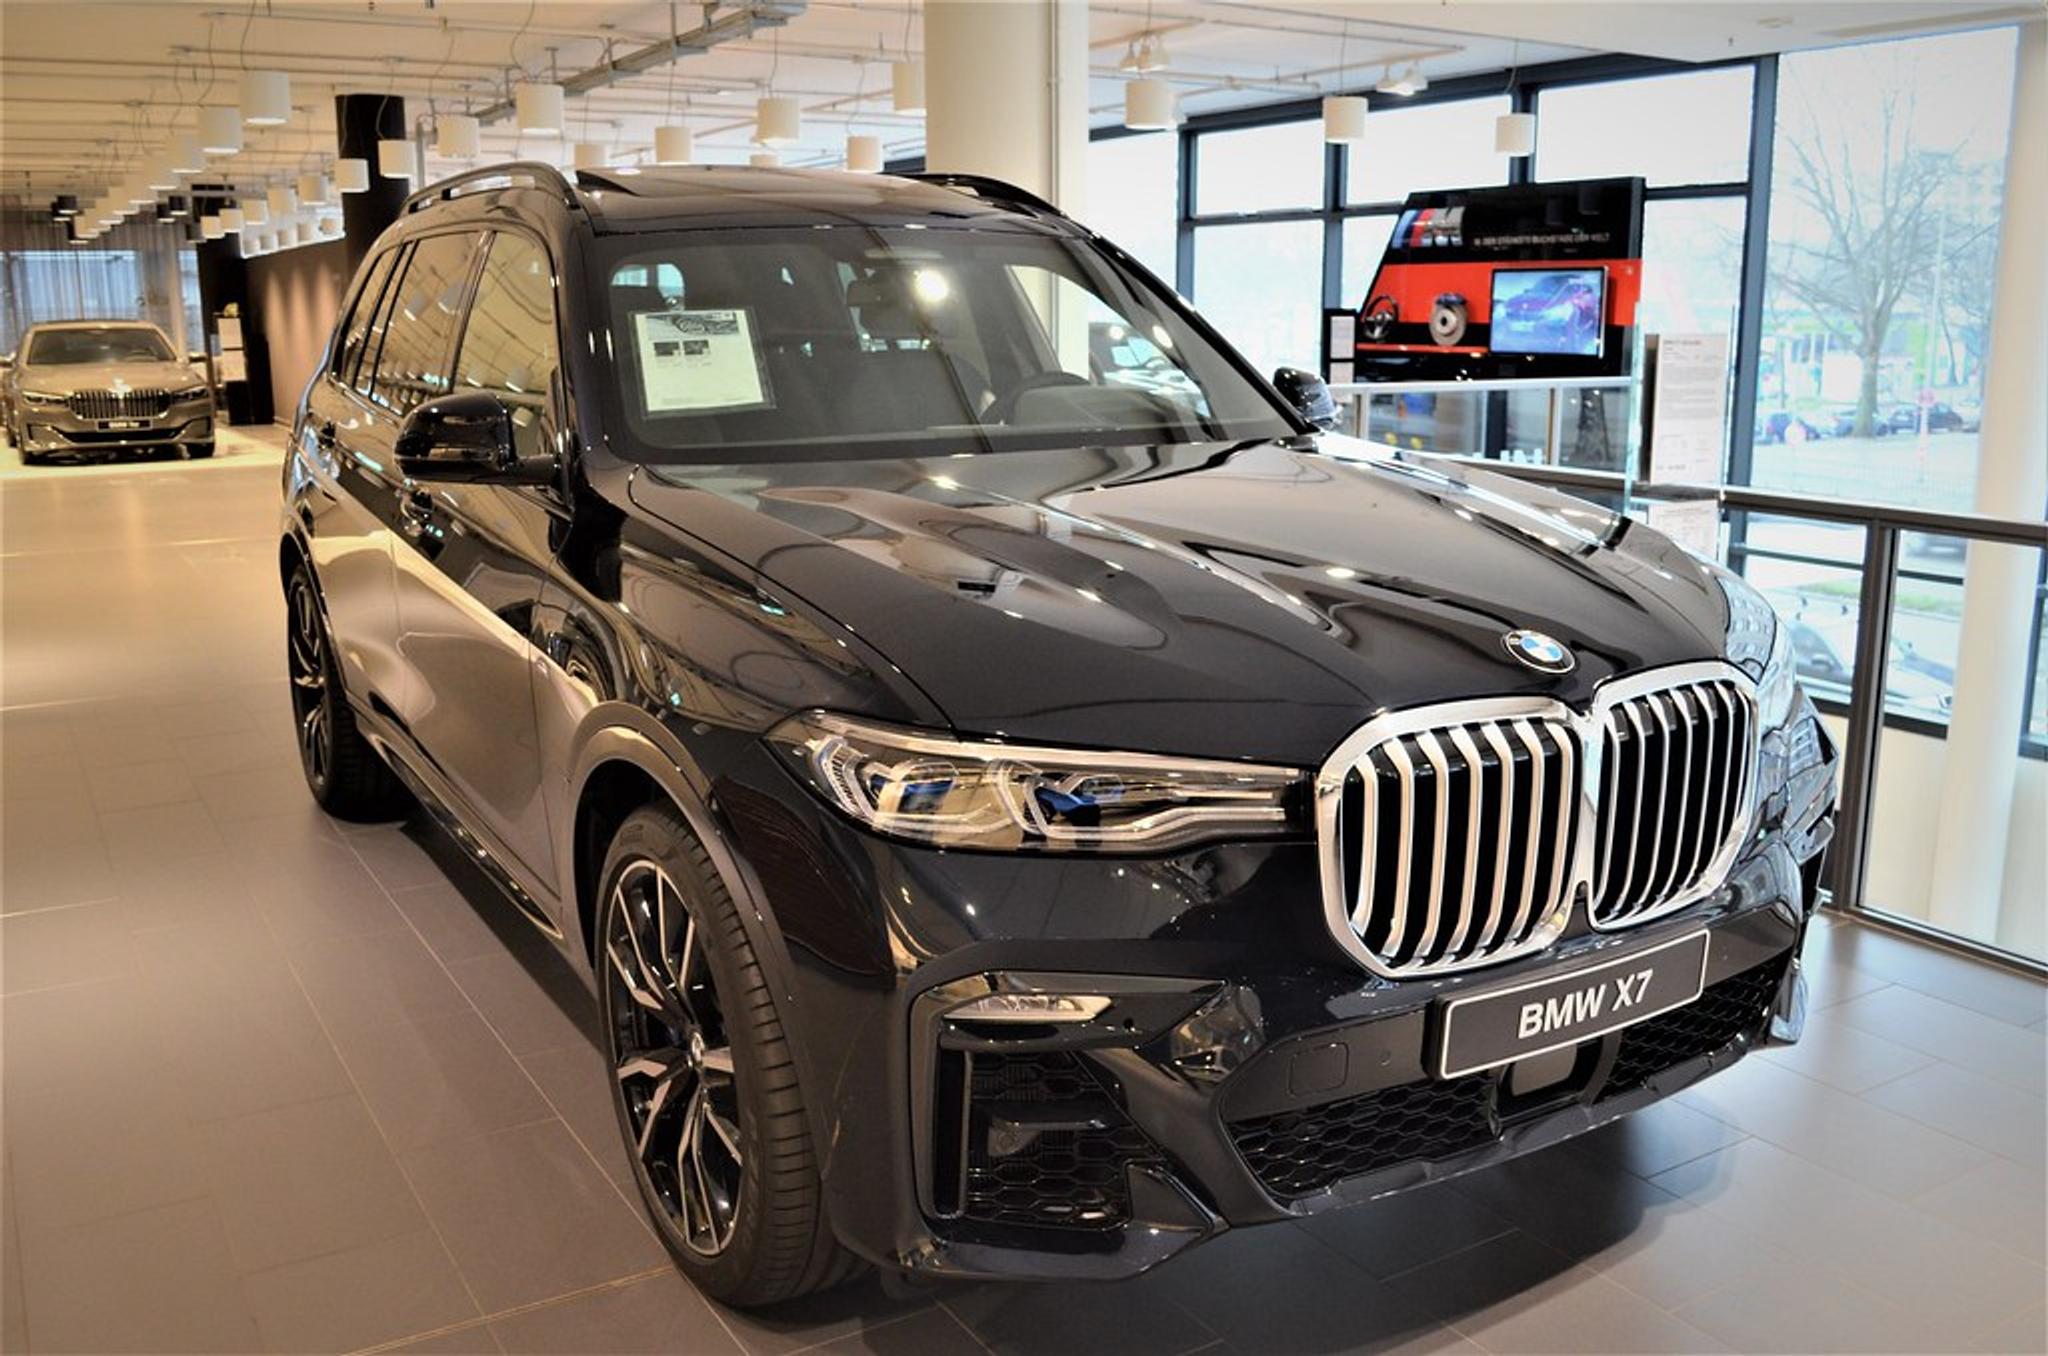 The new BMW X7 in a showroom